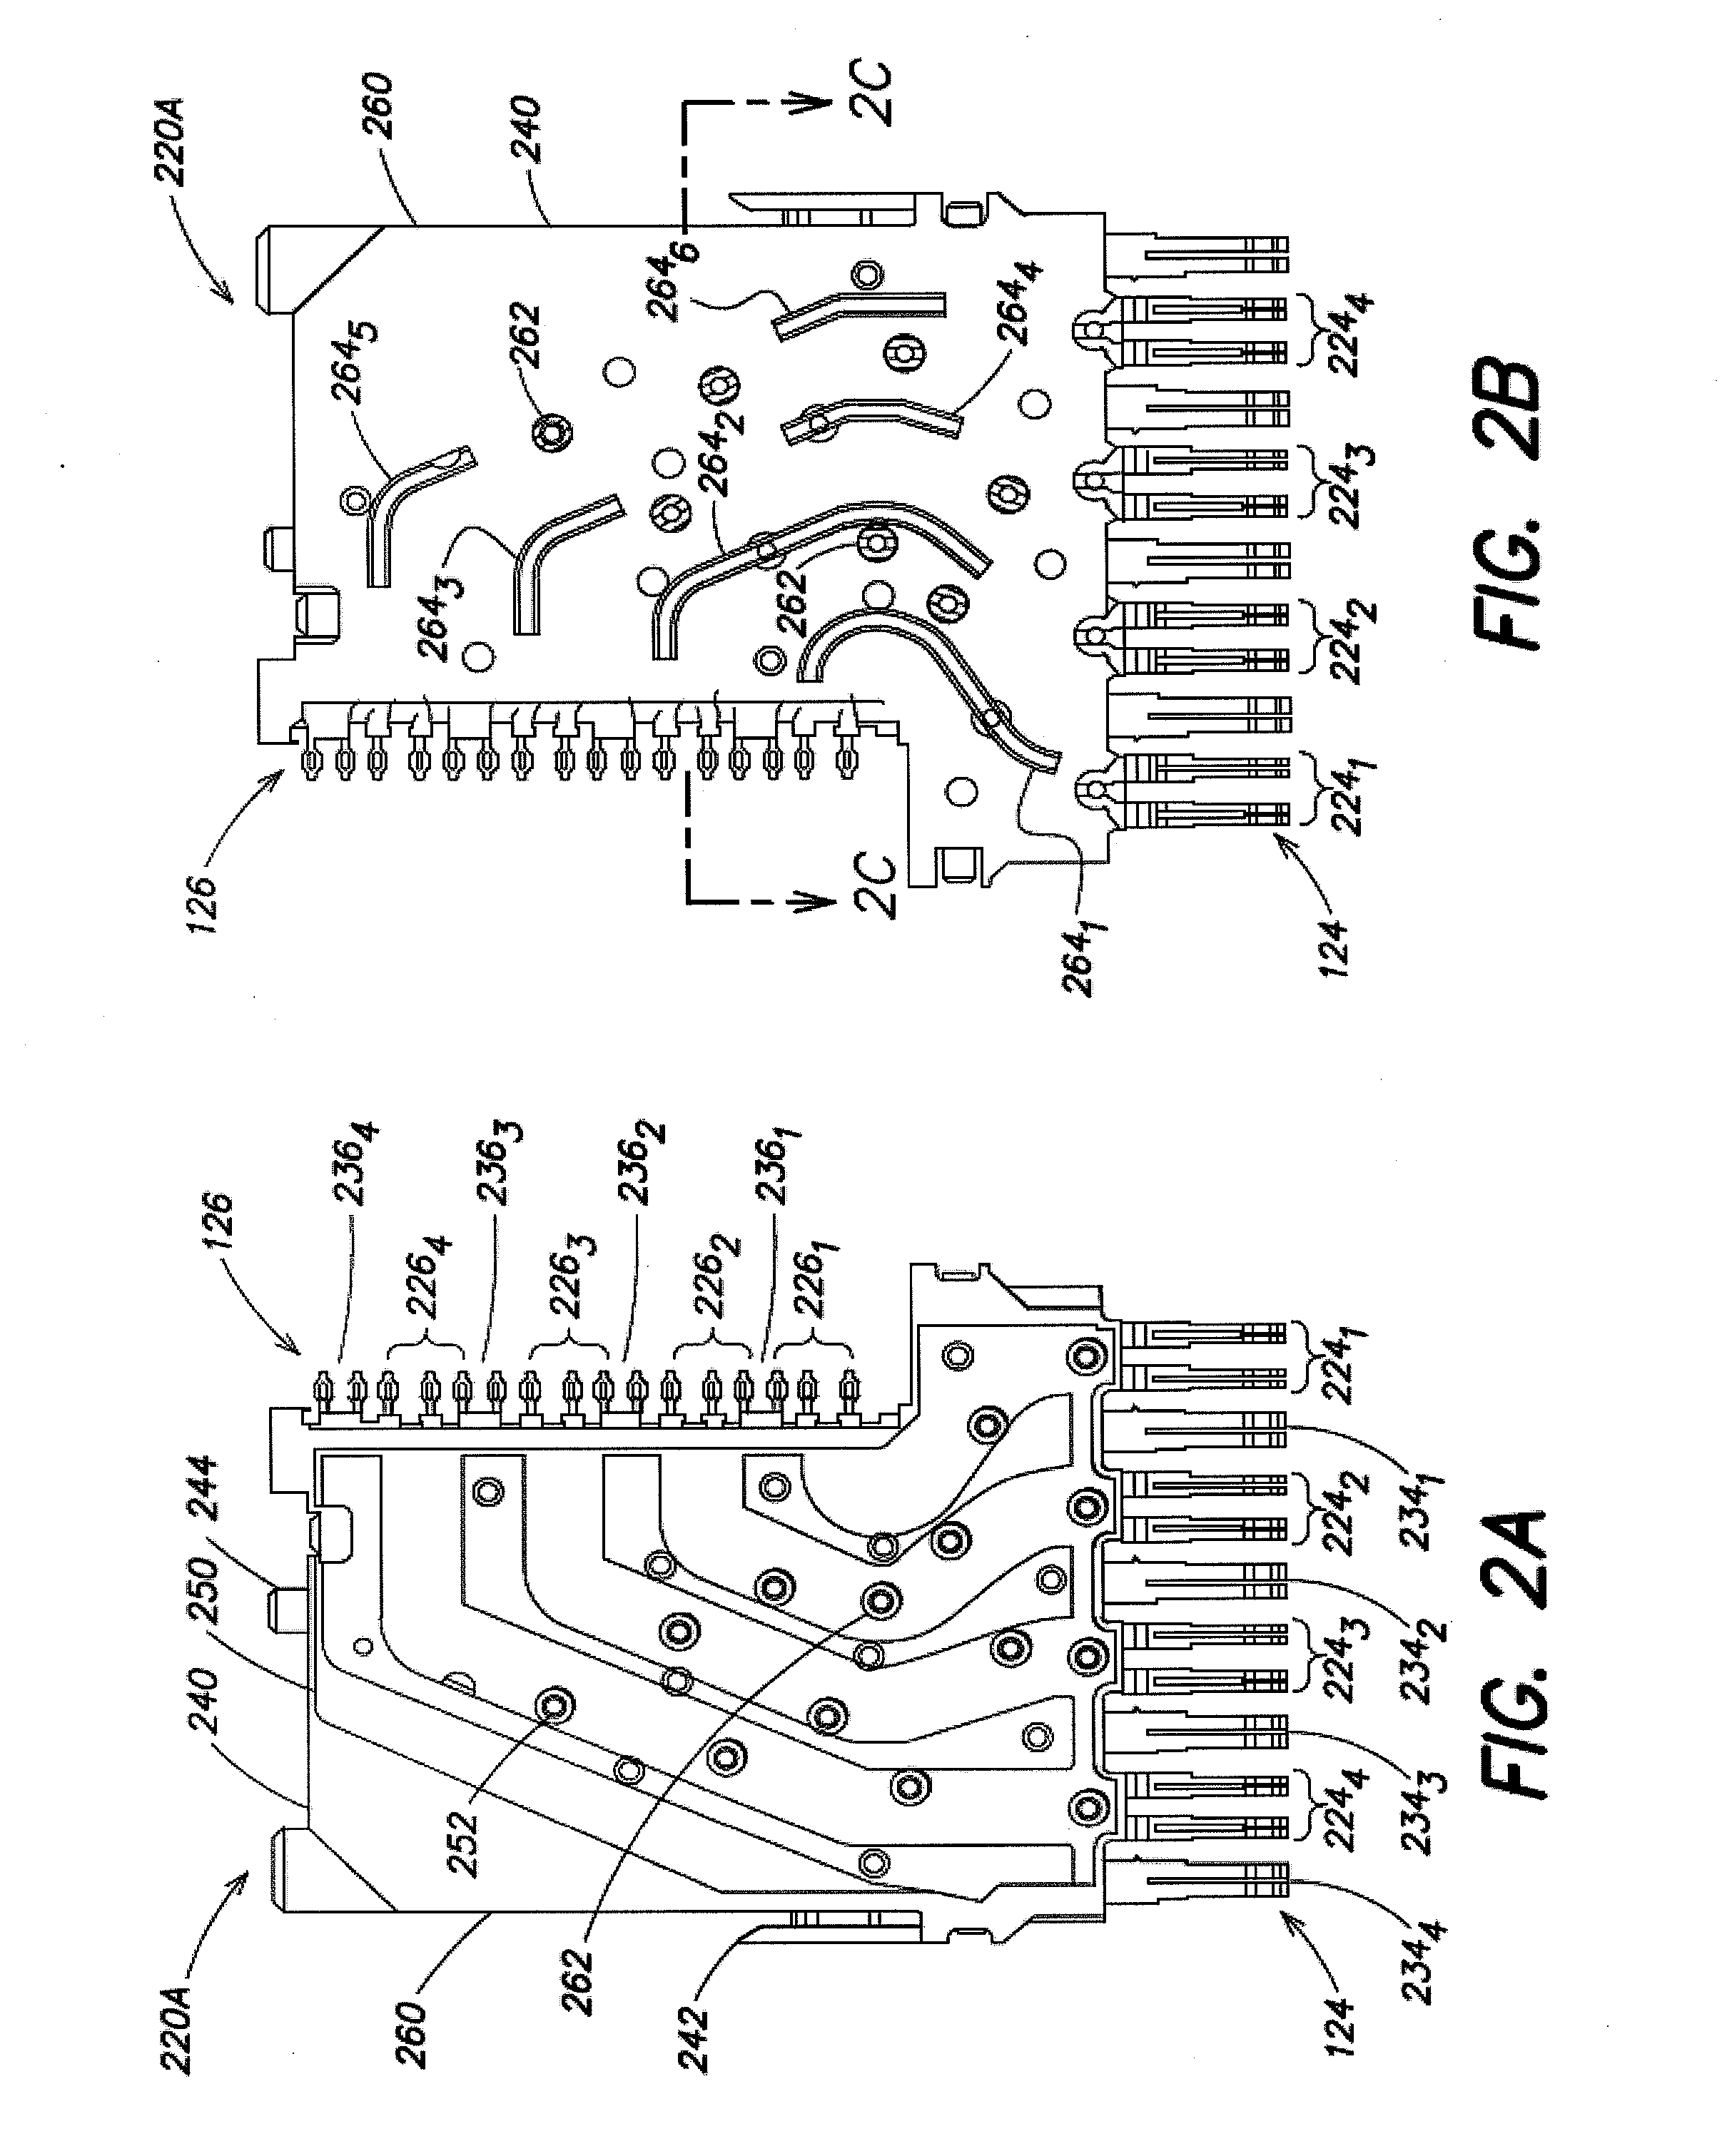 Differential electrical connector with improved skew control